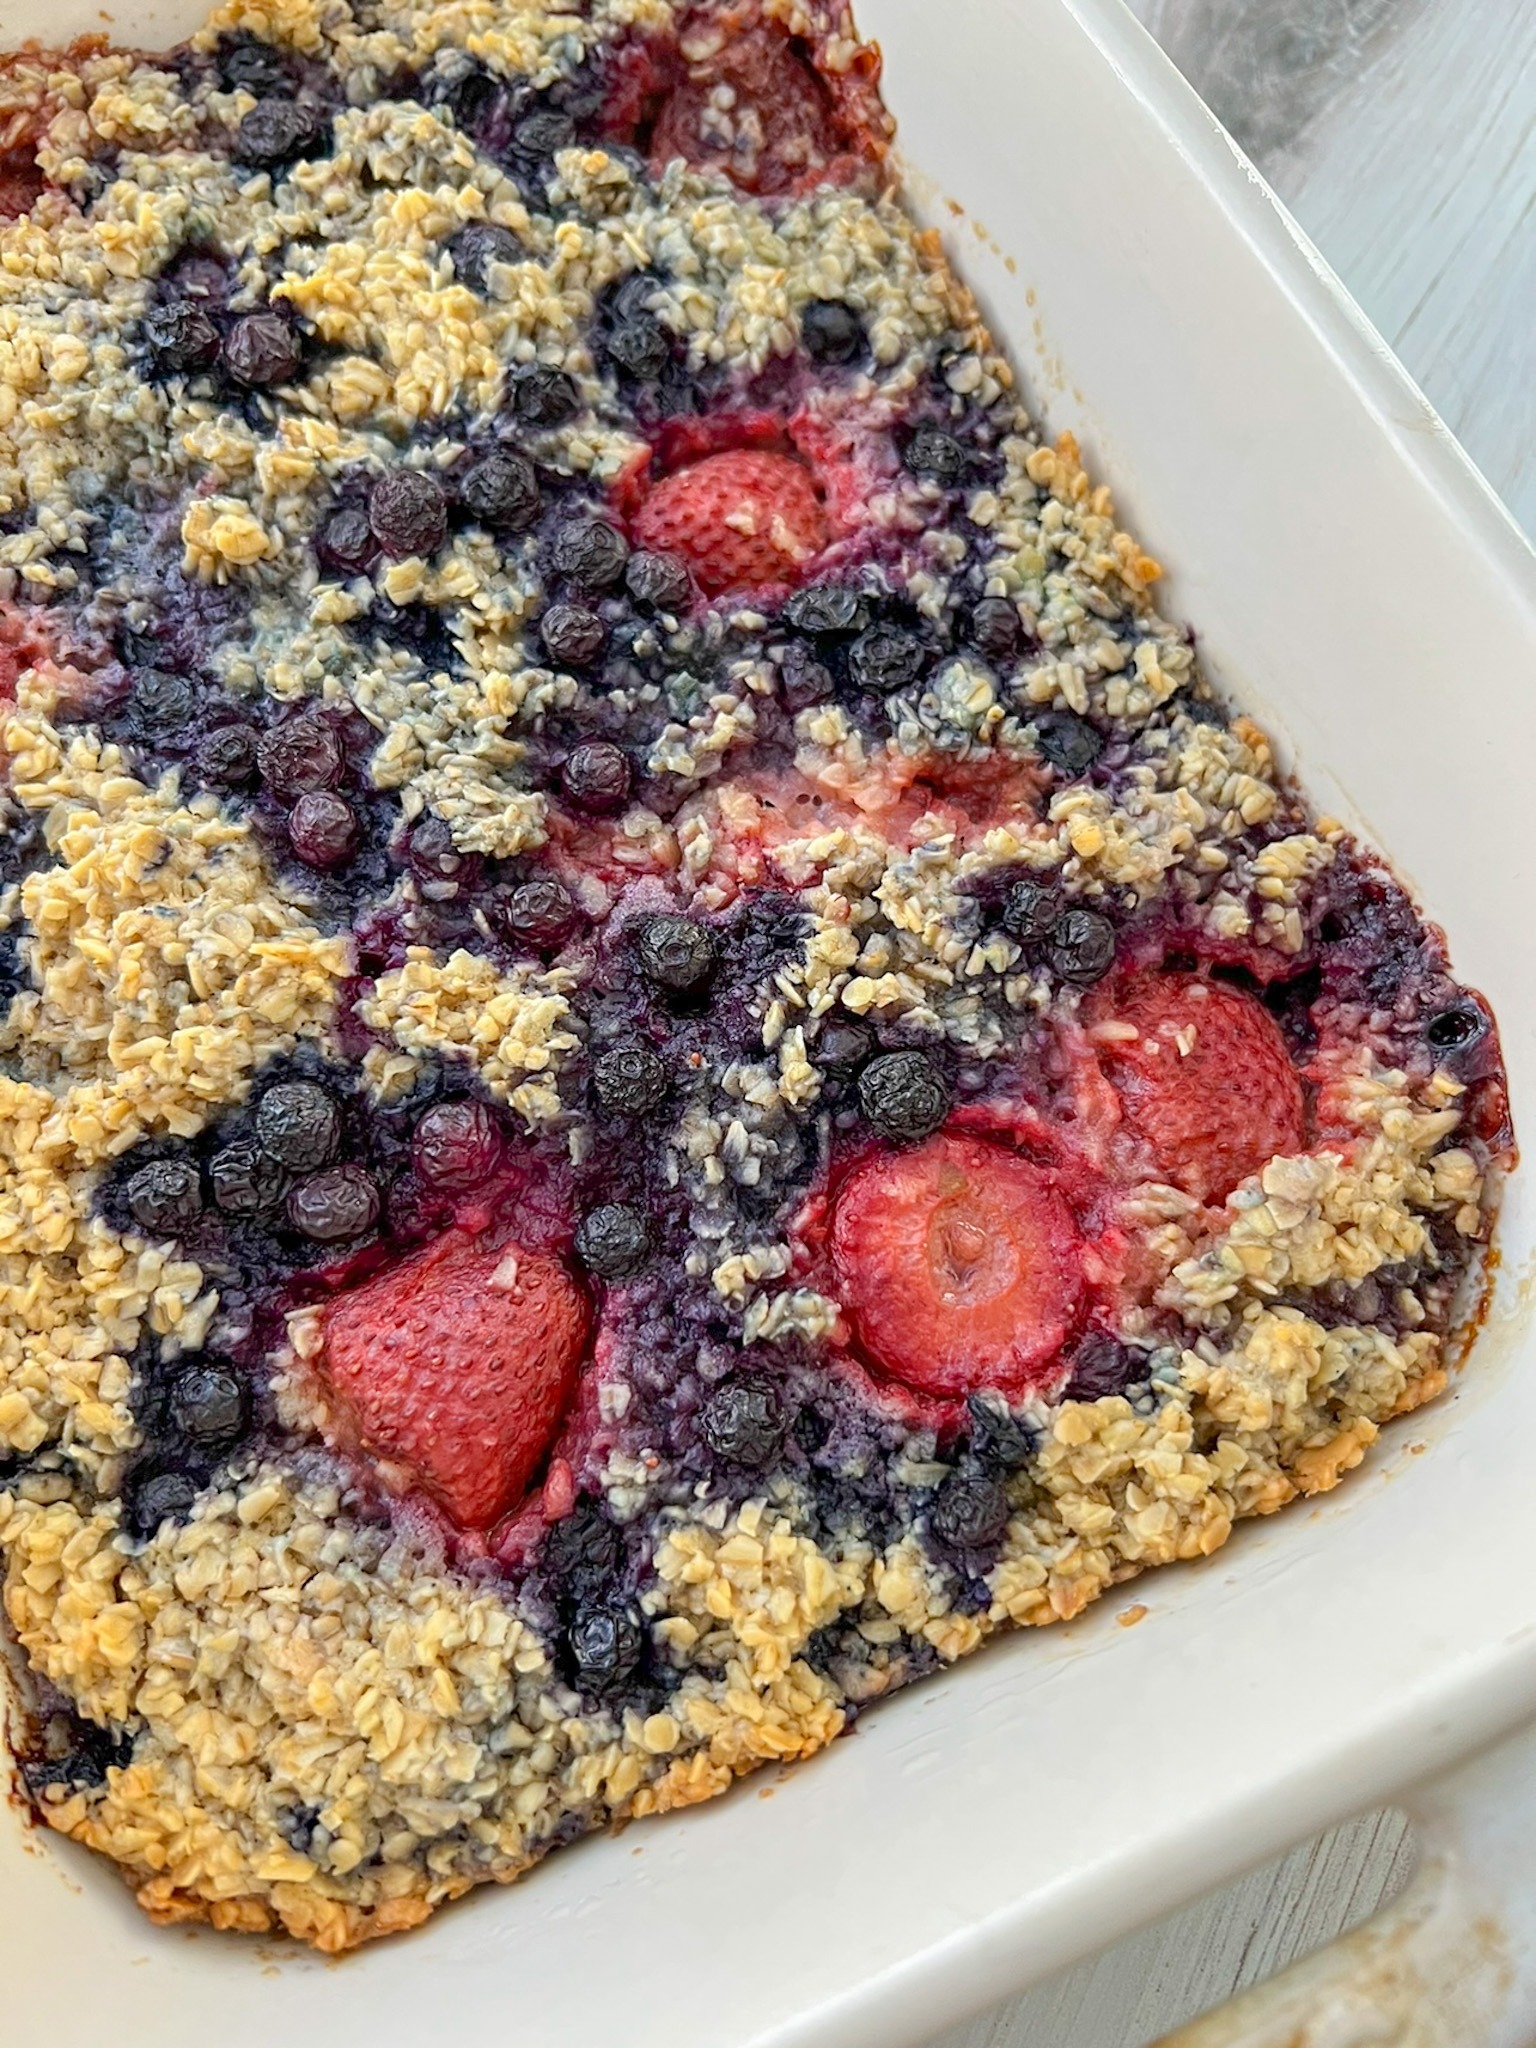 freshly baked and unfrosted mixed berry baked oatmeal